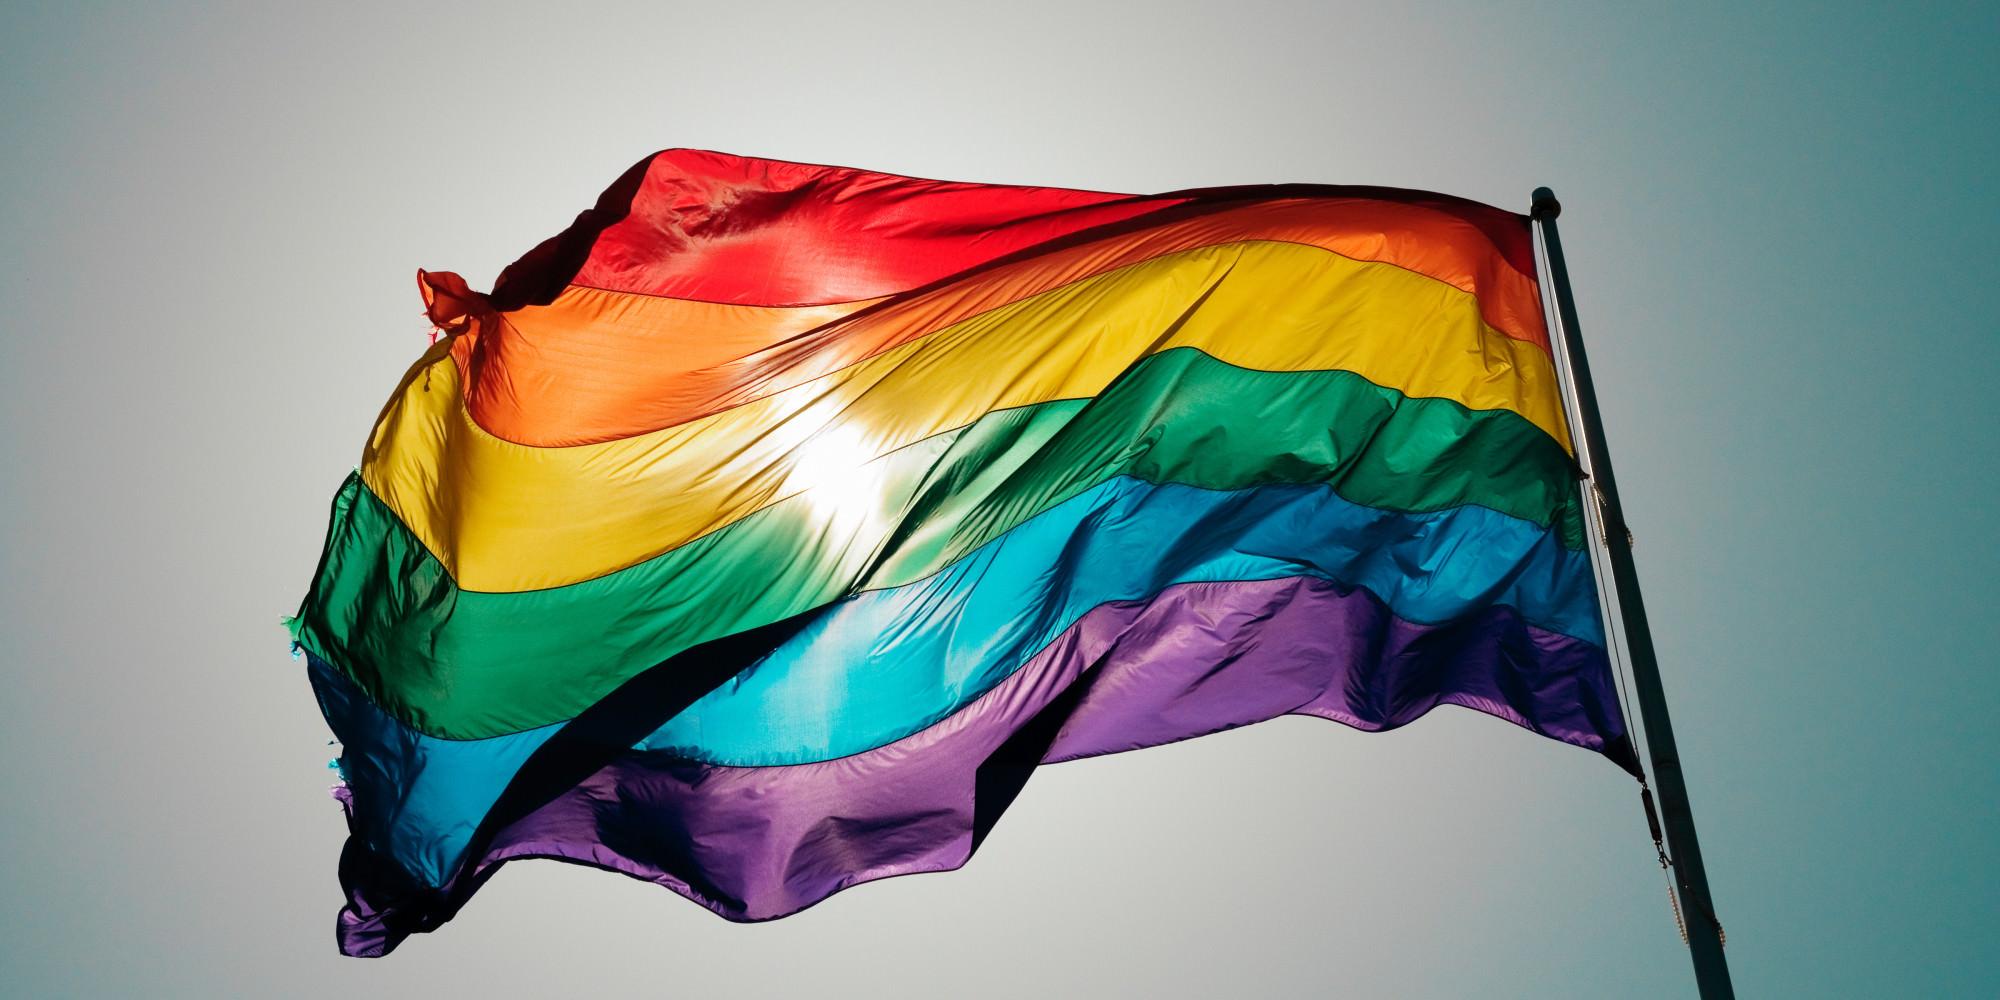 If we're getting rid of symbols of bigotry, rainbow flag is next